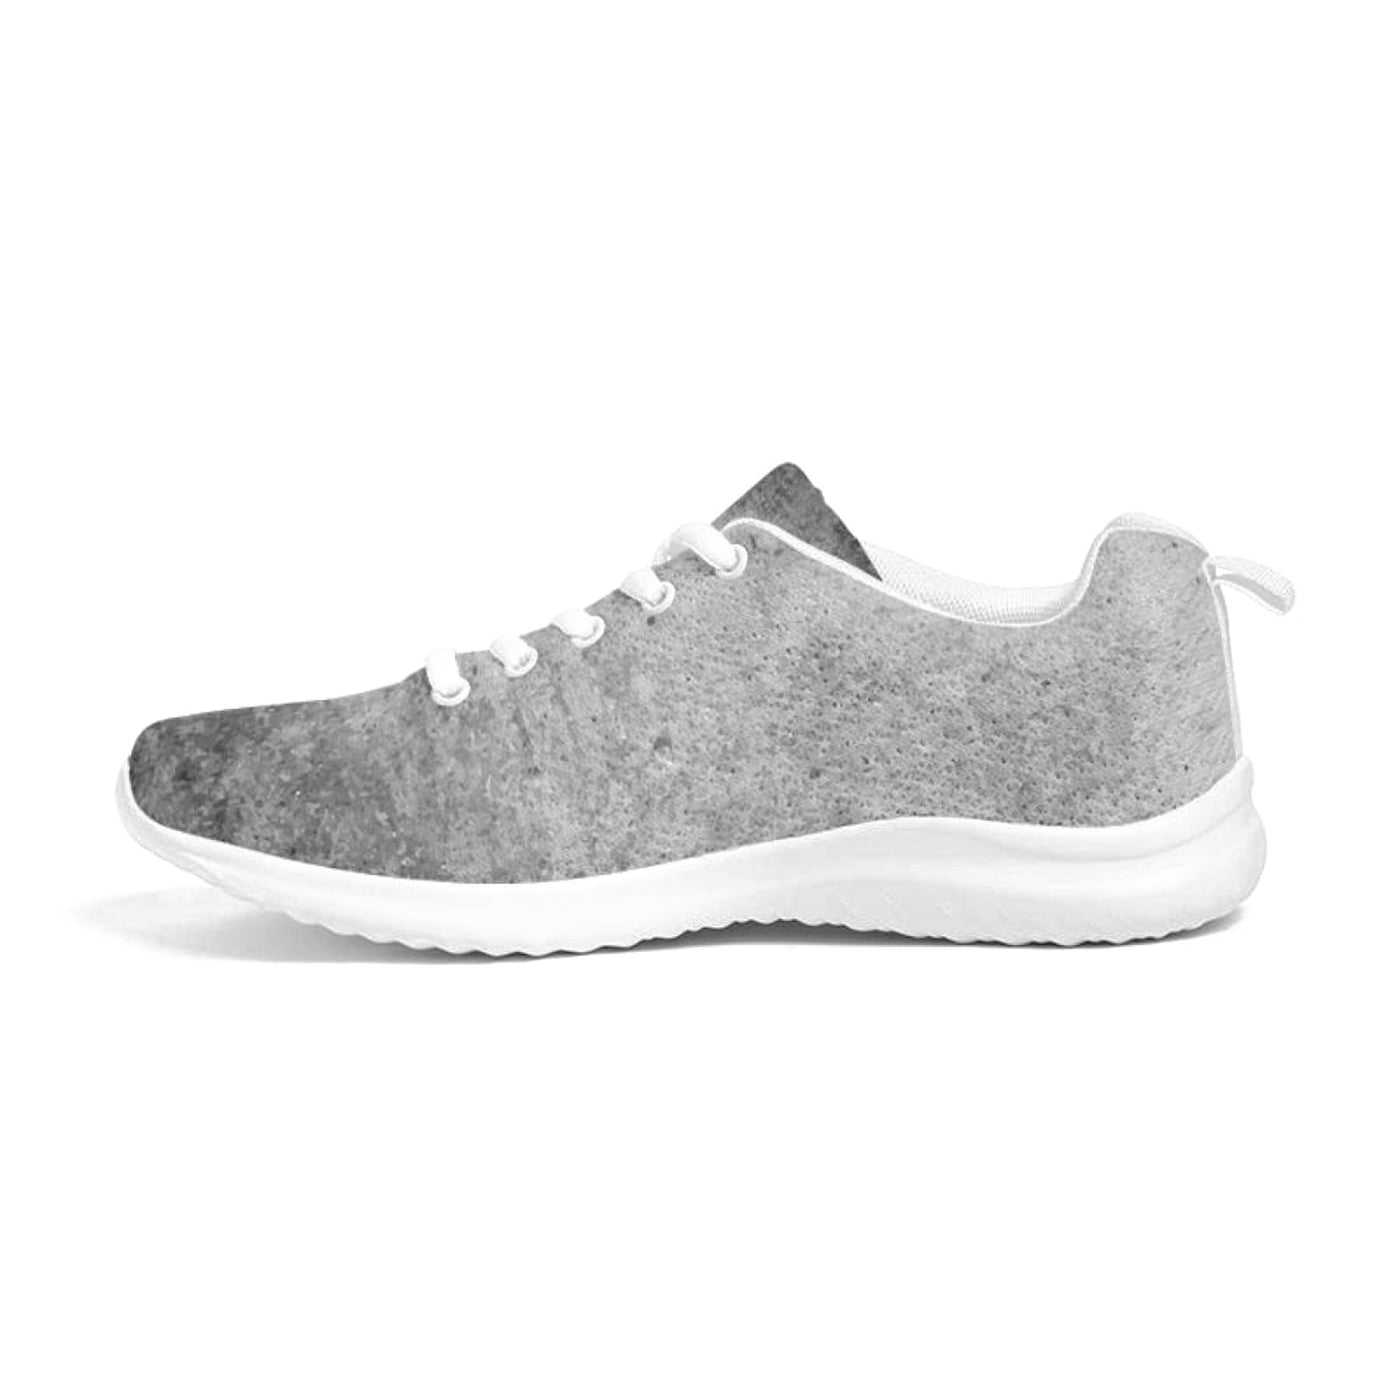 Womens Sneakers - Grey Tie-dye Style Canvas Sports Shoes / Running - Womens |